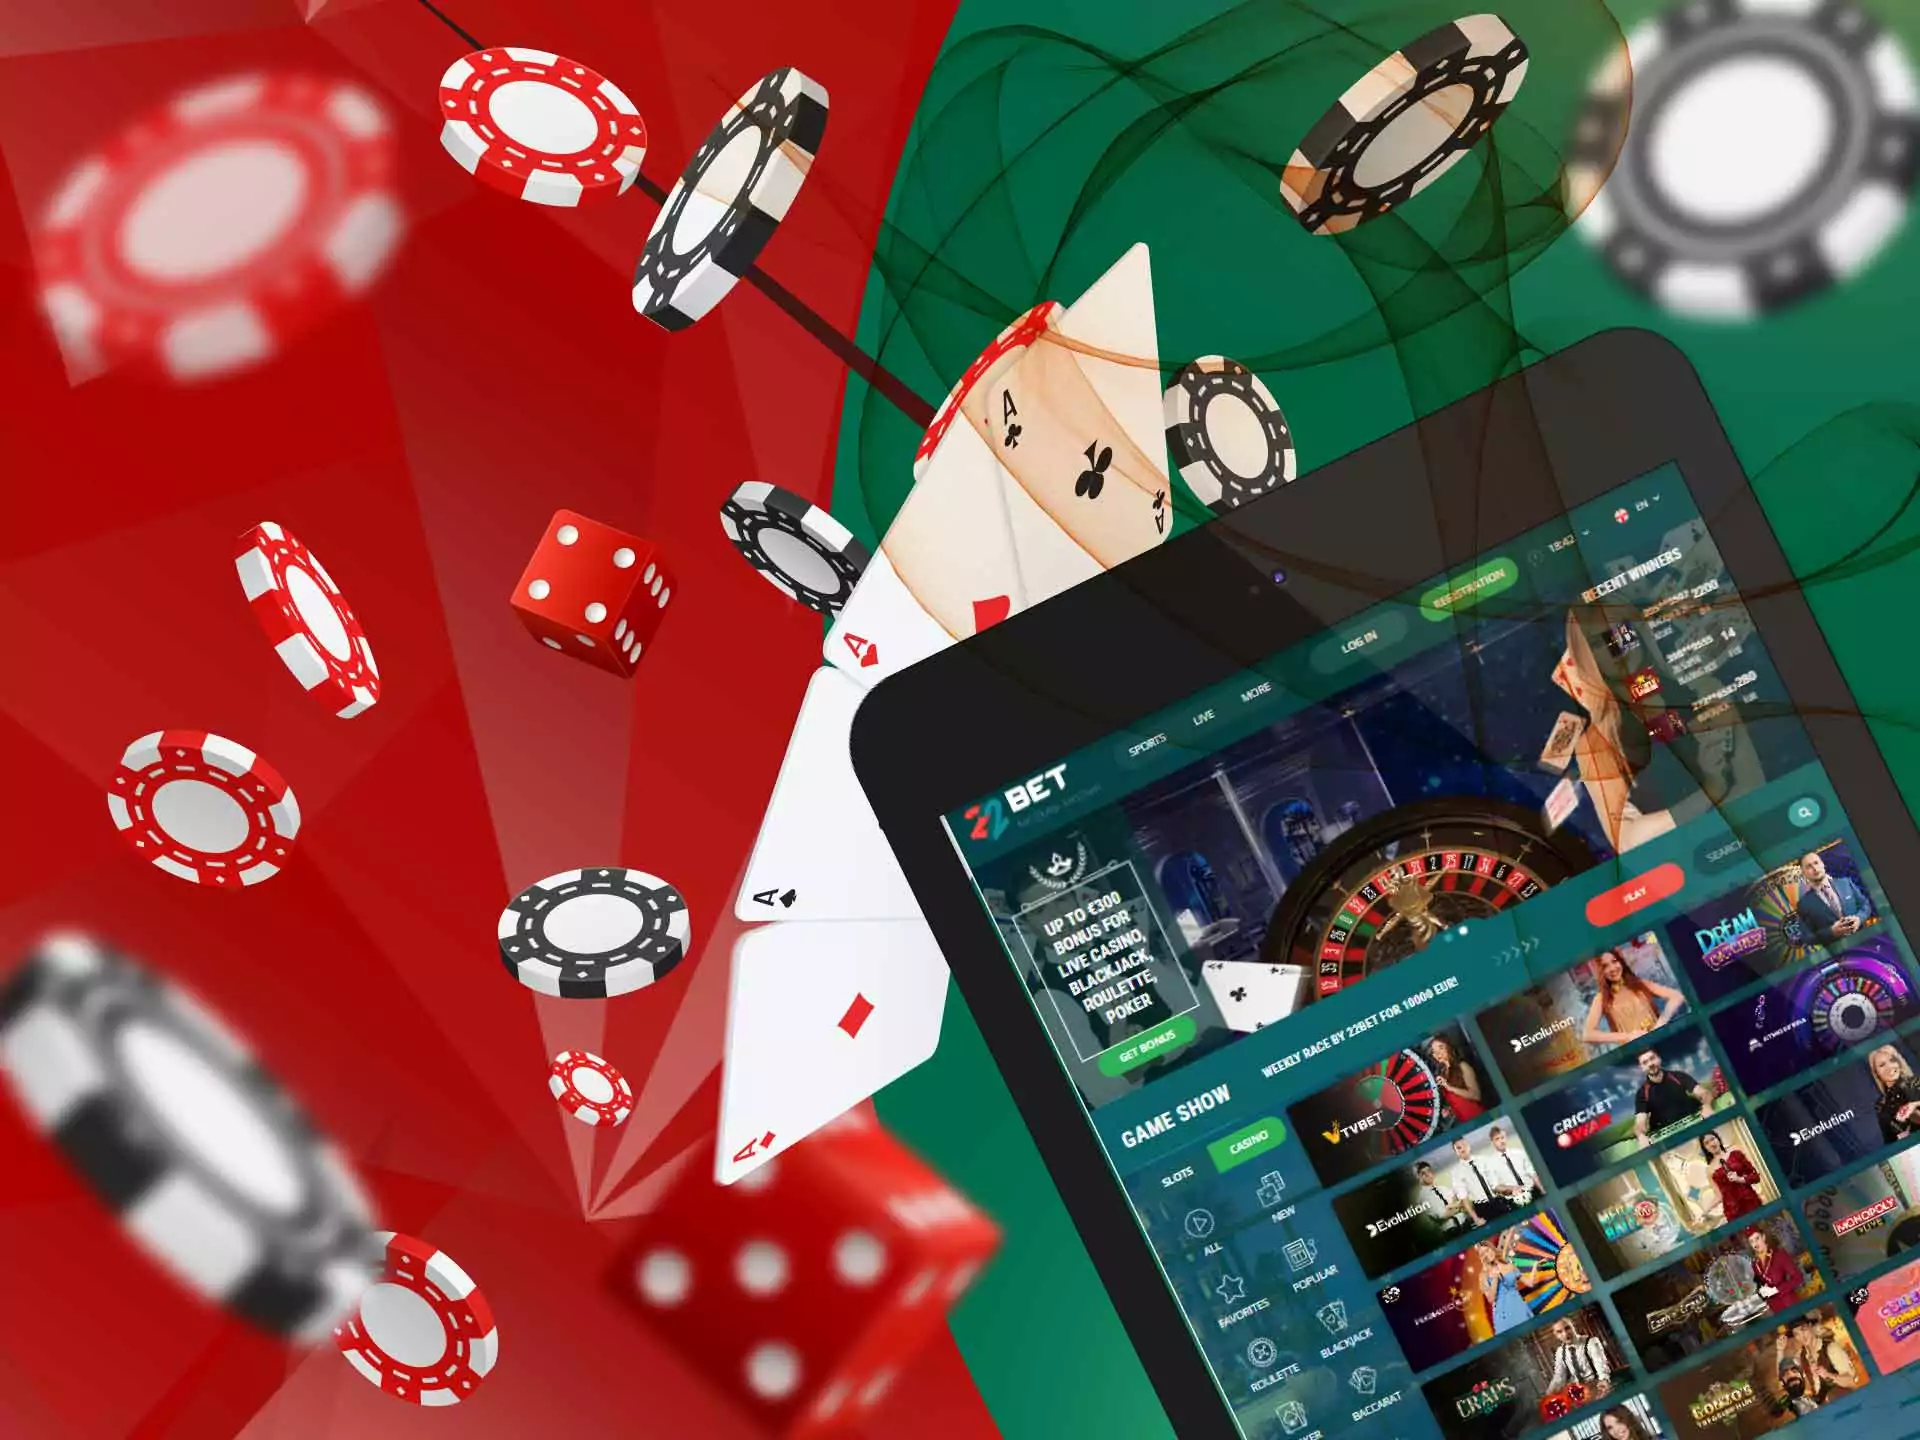 You can also play TV games in the 22Bet onliine casino.